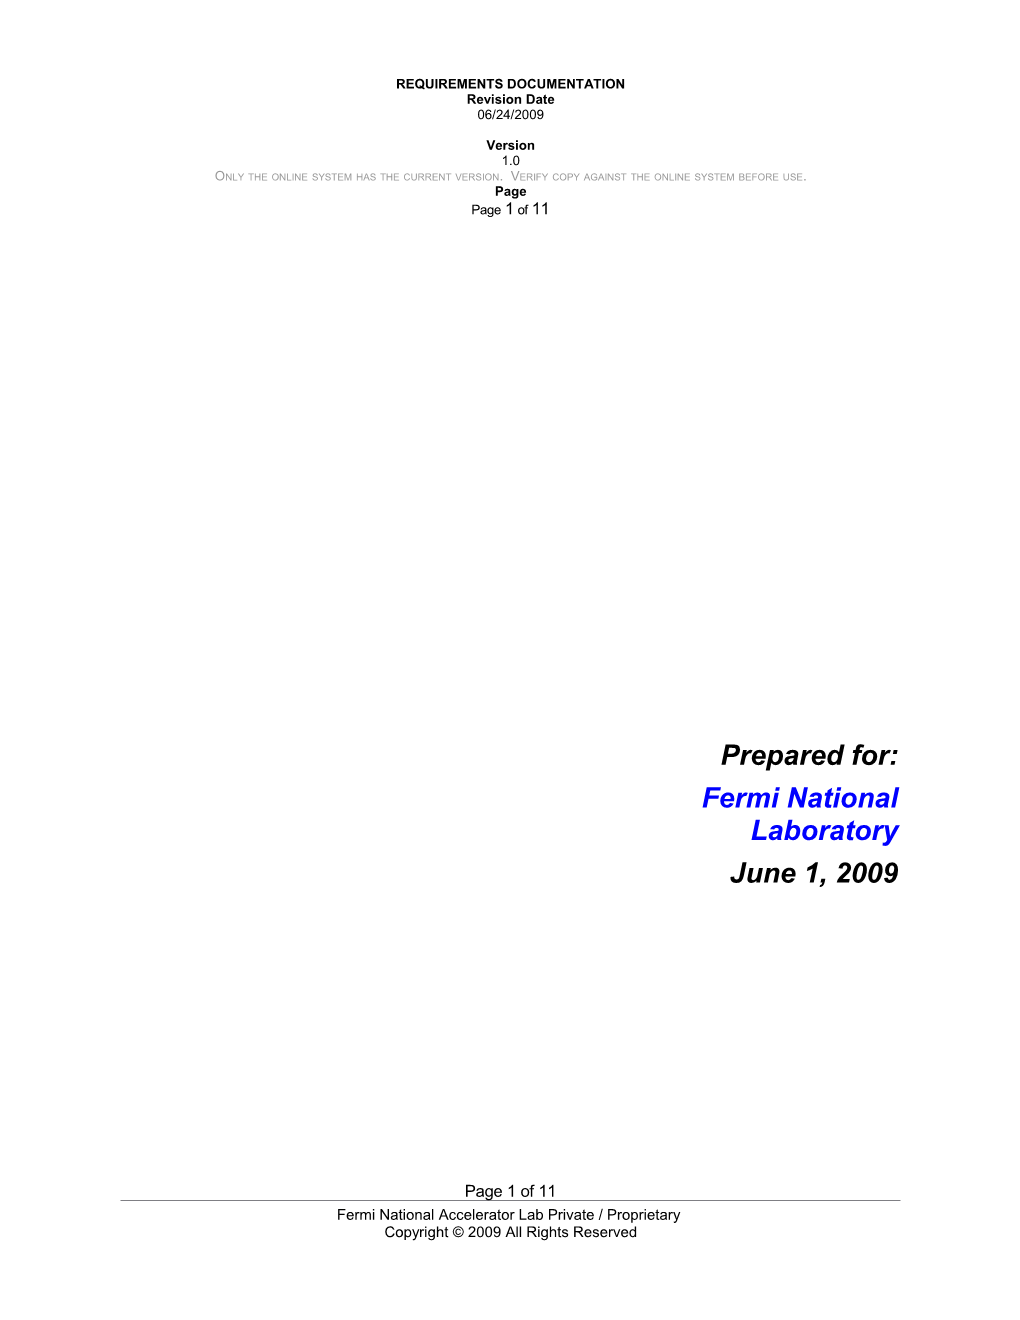 Fermilab Incident Business Process Requirements Document 1.0